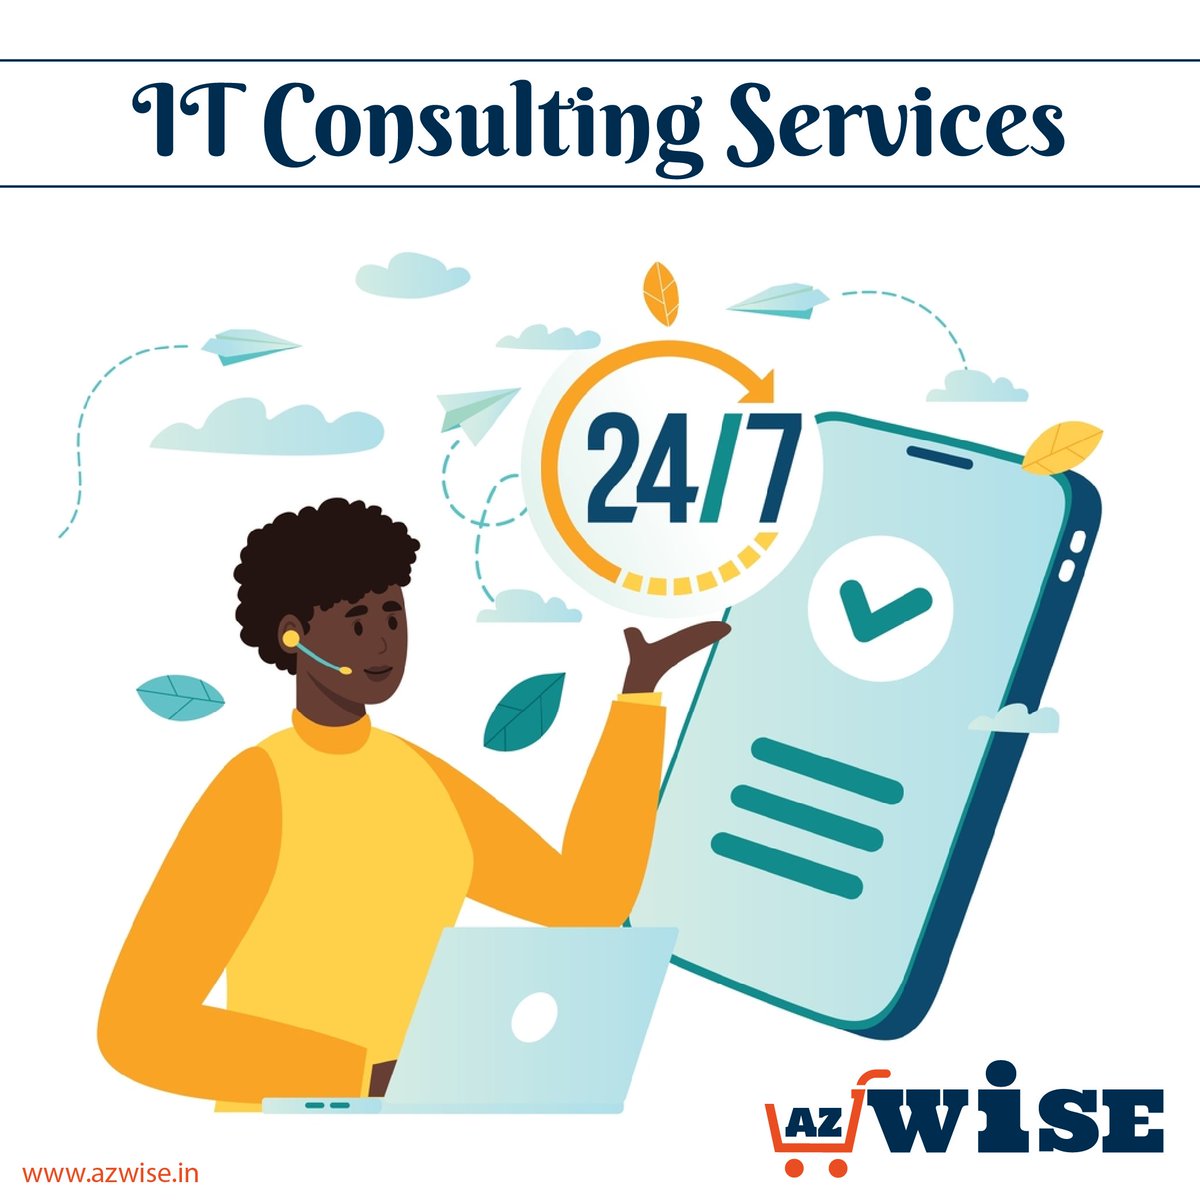 Our expert IT consulting services empower your business with tailored solutions for sustainable growth. 
.
#azwise #ITConsulting #DigitalTransformation #TechnologyInsights #Cybersecurity #CloudIntegration🚀💼🔍